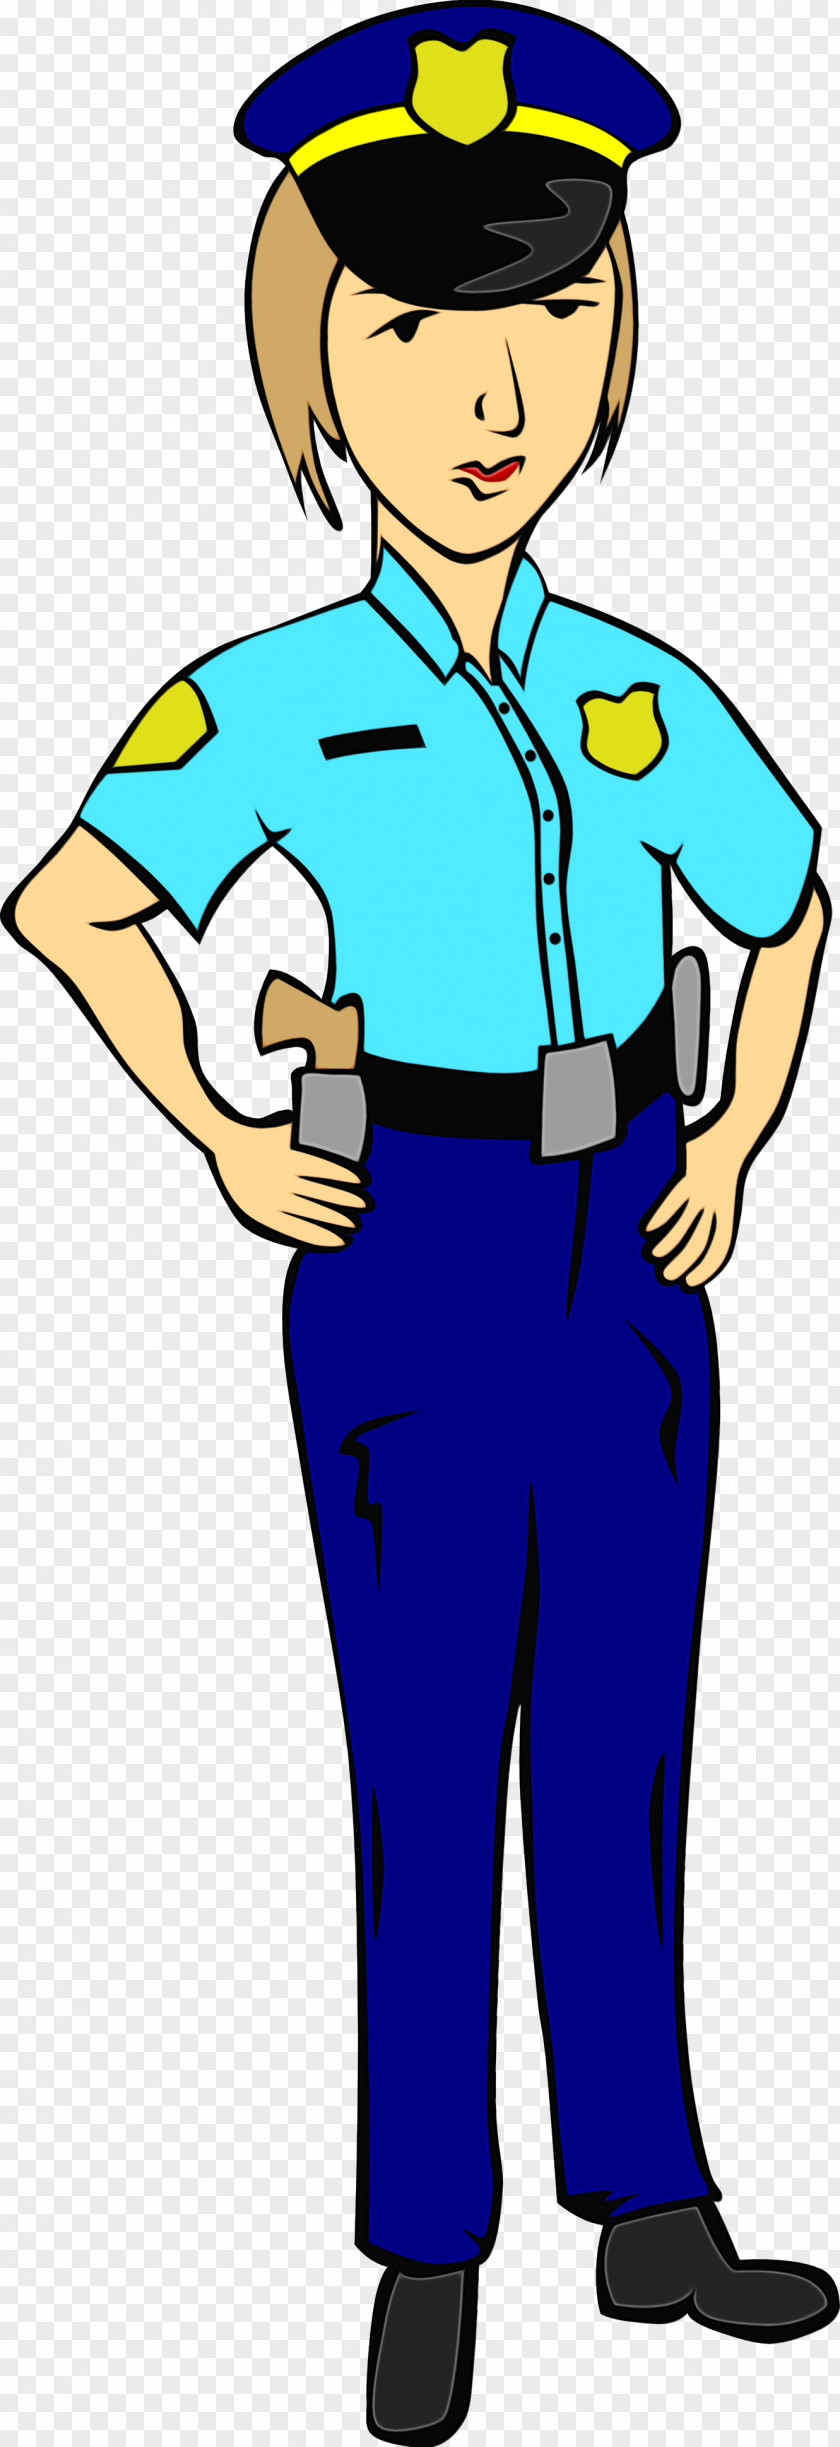 Costume Electric Blue Police Cartoon PNG